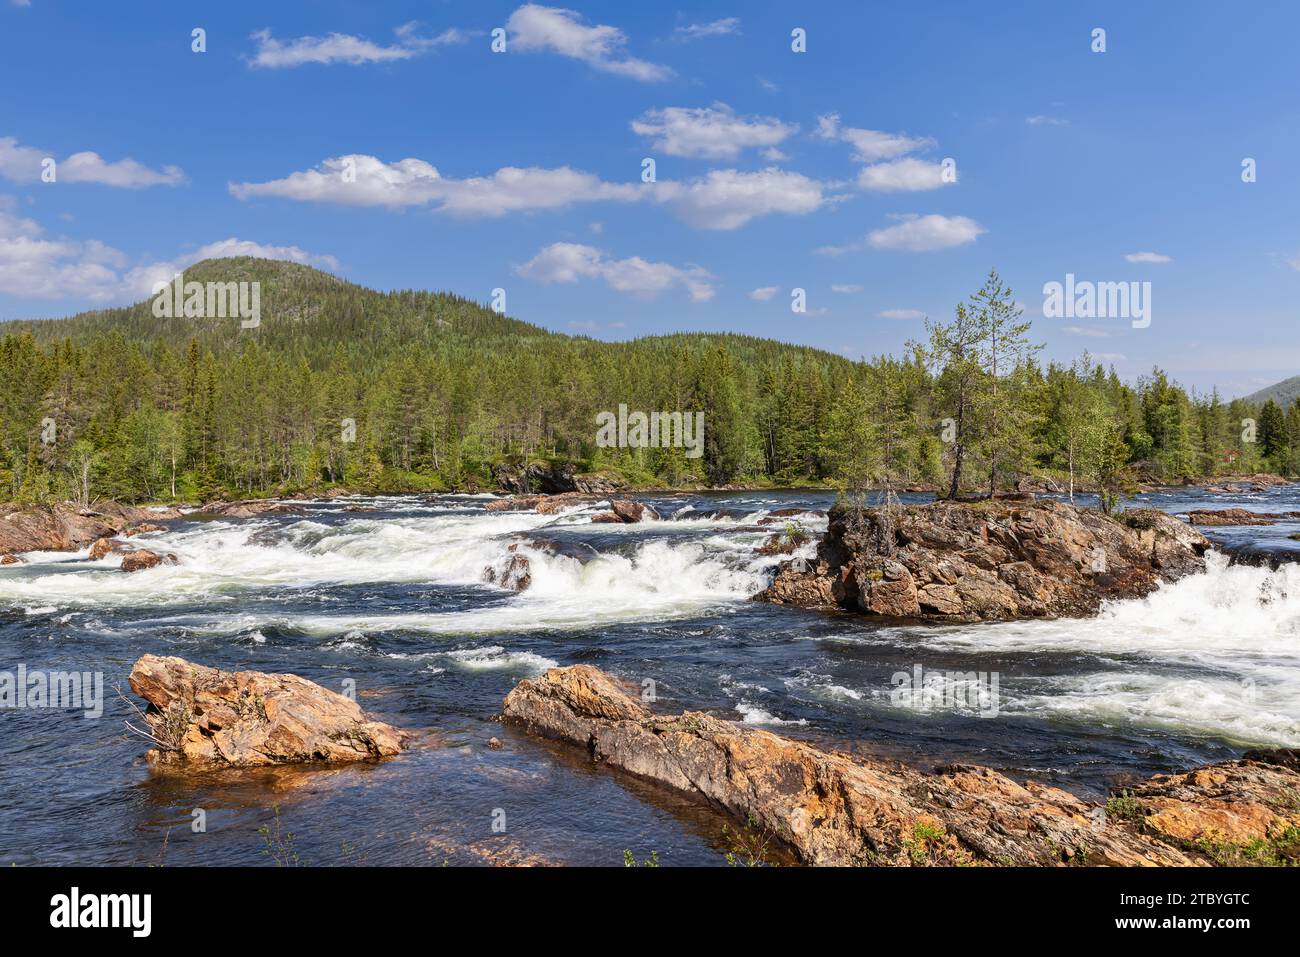 Solitary trees sprout from large rocks amidst the cascades of the Namsen River in Namsskogan, Trondelag, Norway, flanked by dense forests under a sunl Stock Photo